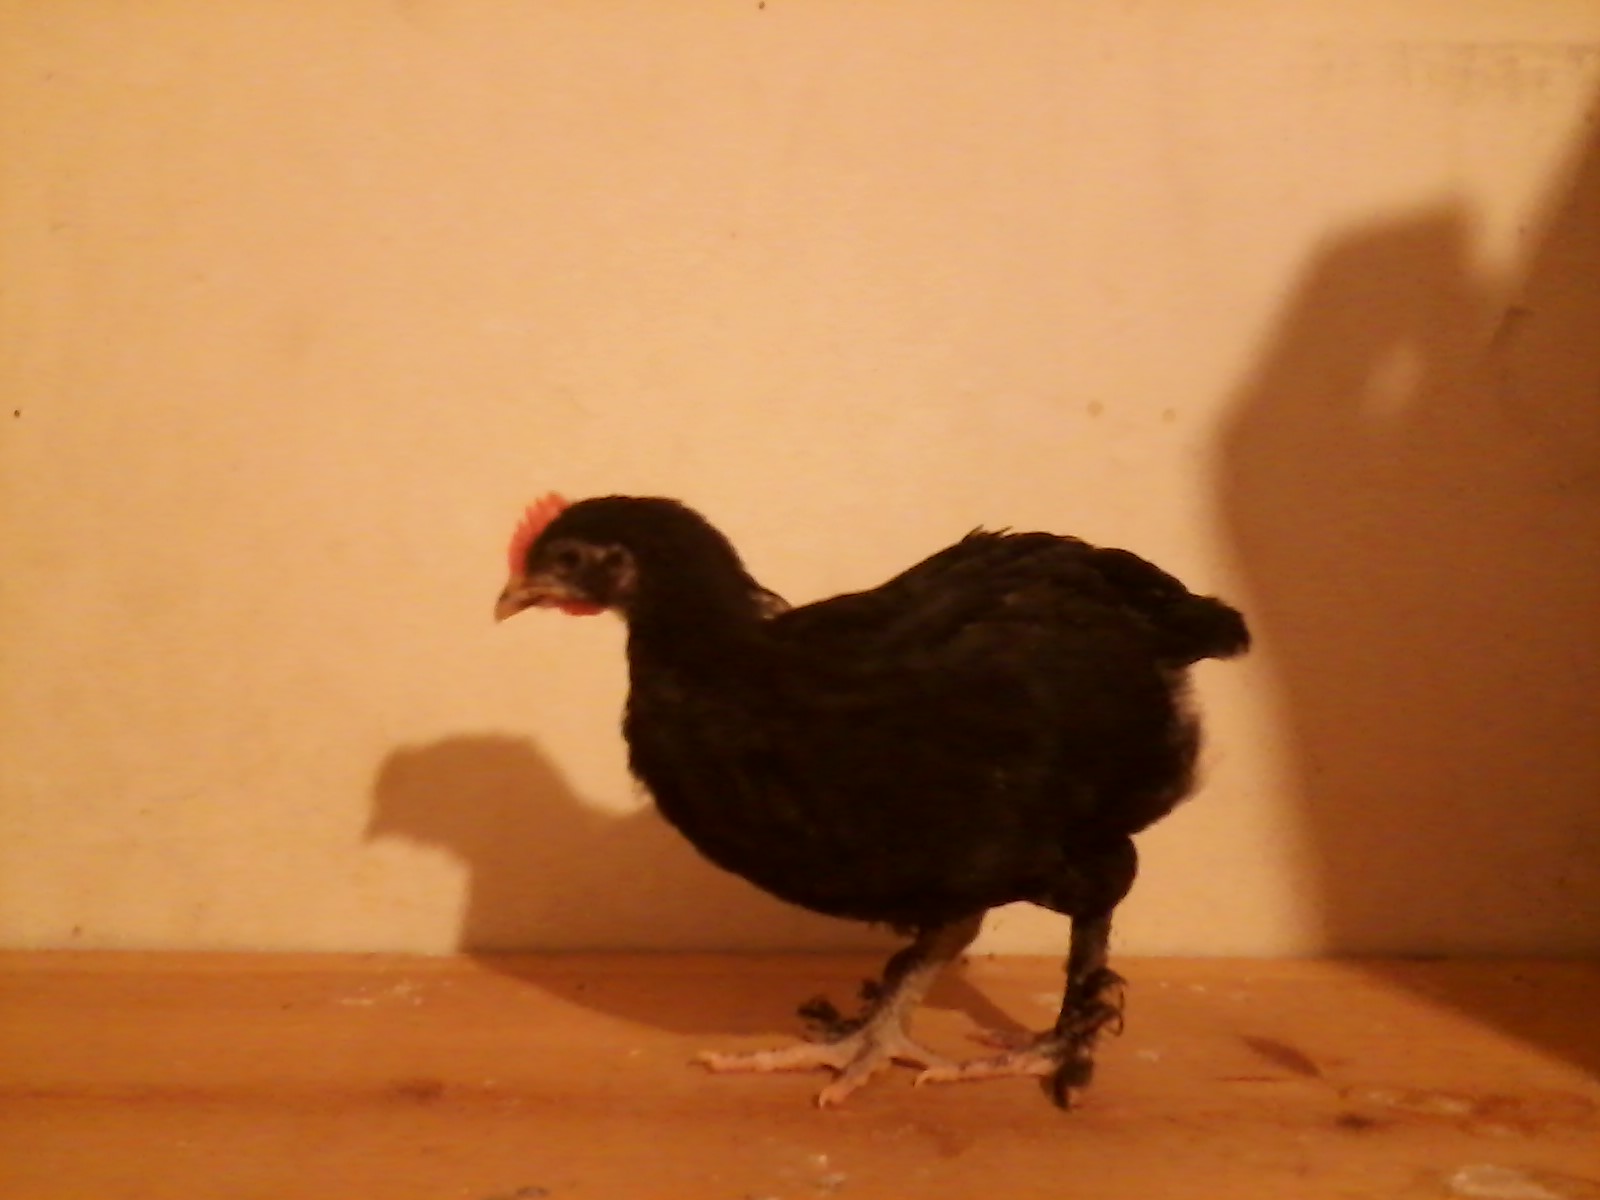 And, yet another, 5 week old BCM cockerel.